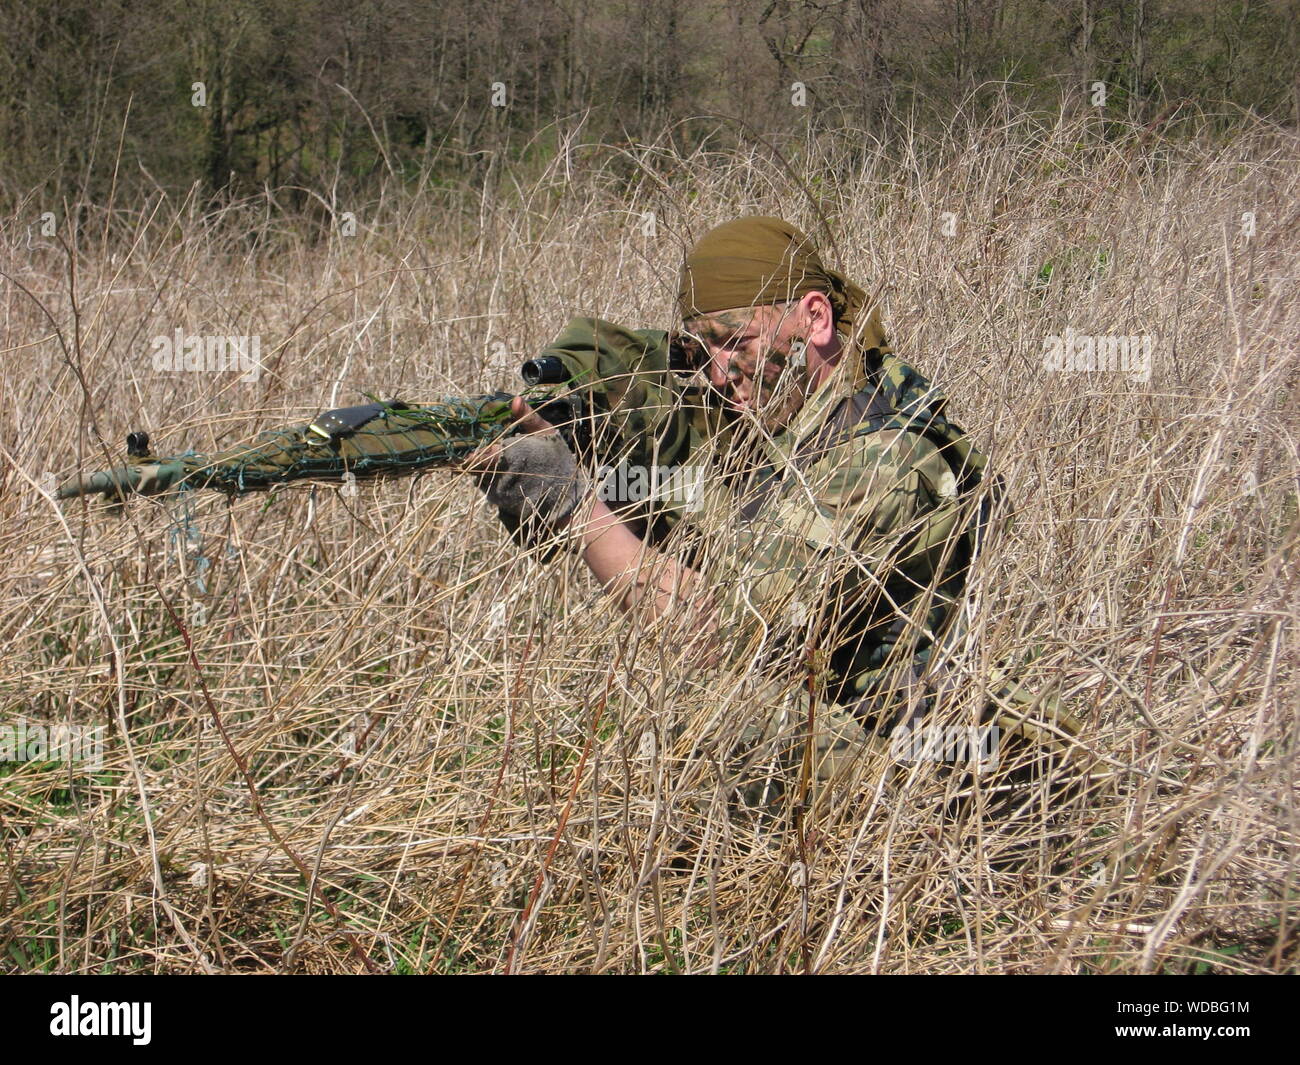 Sniped Aiming With Rifle At Grassy Field Stock Photo